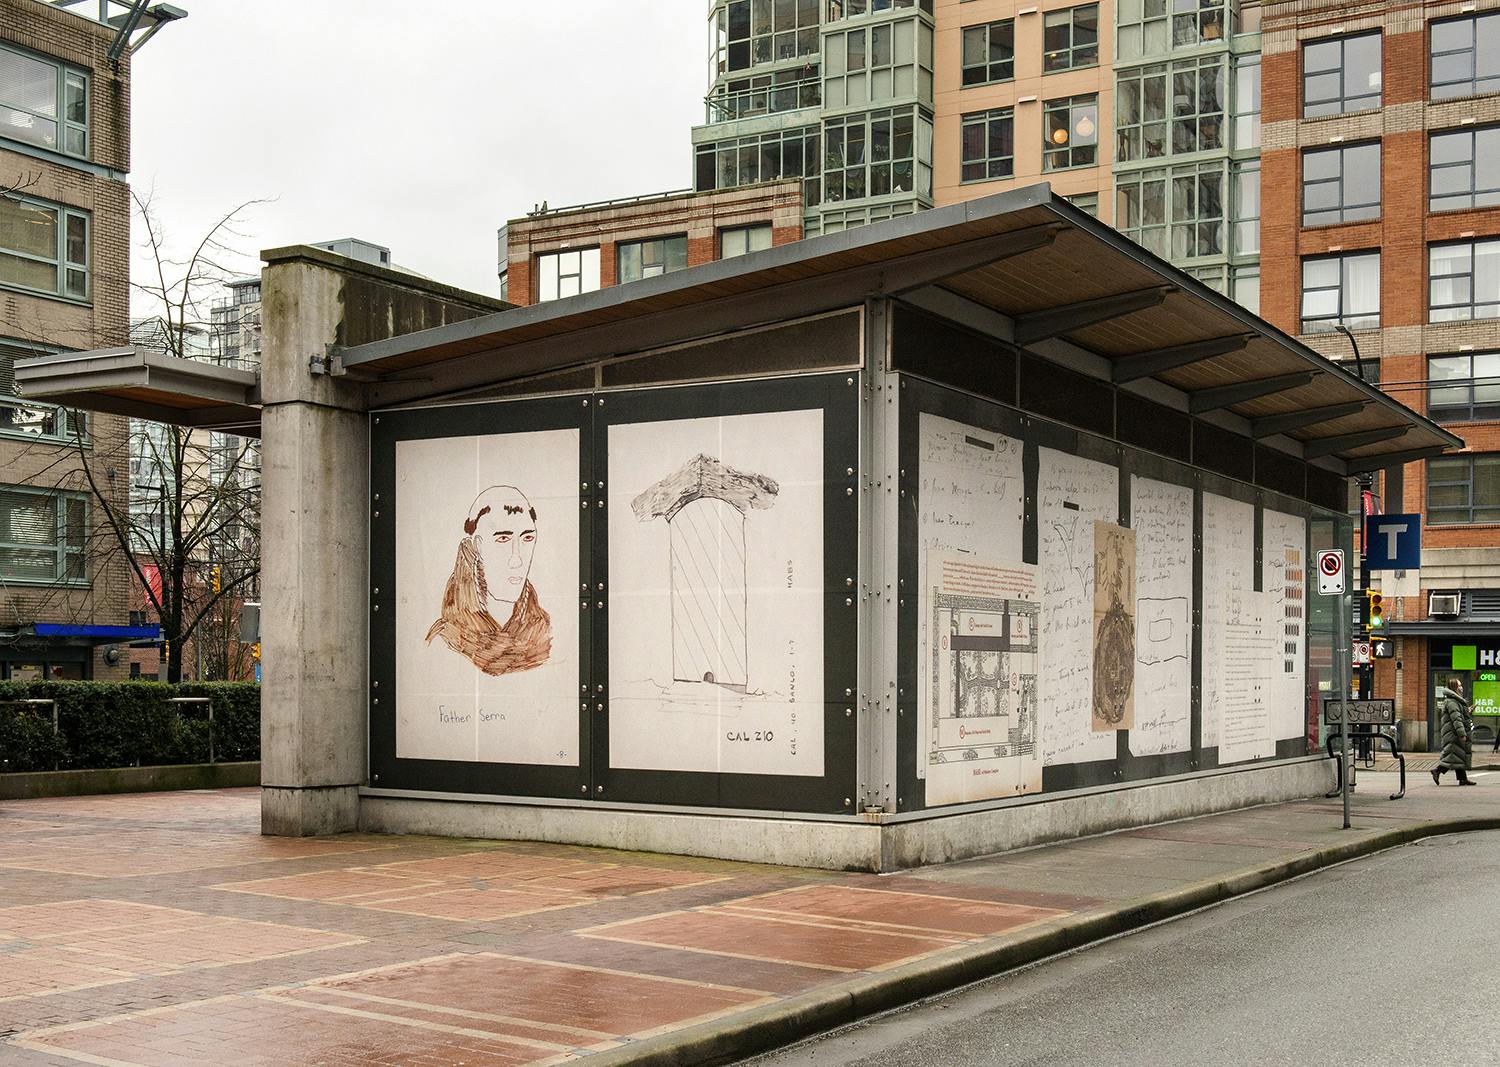 An exterior view of a train station displaying Sandoval’s work printed in vinyl. The work includes a collage of scanned archival documents on one side of the station and scanned drawings on the other. 